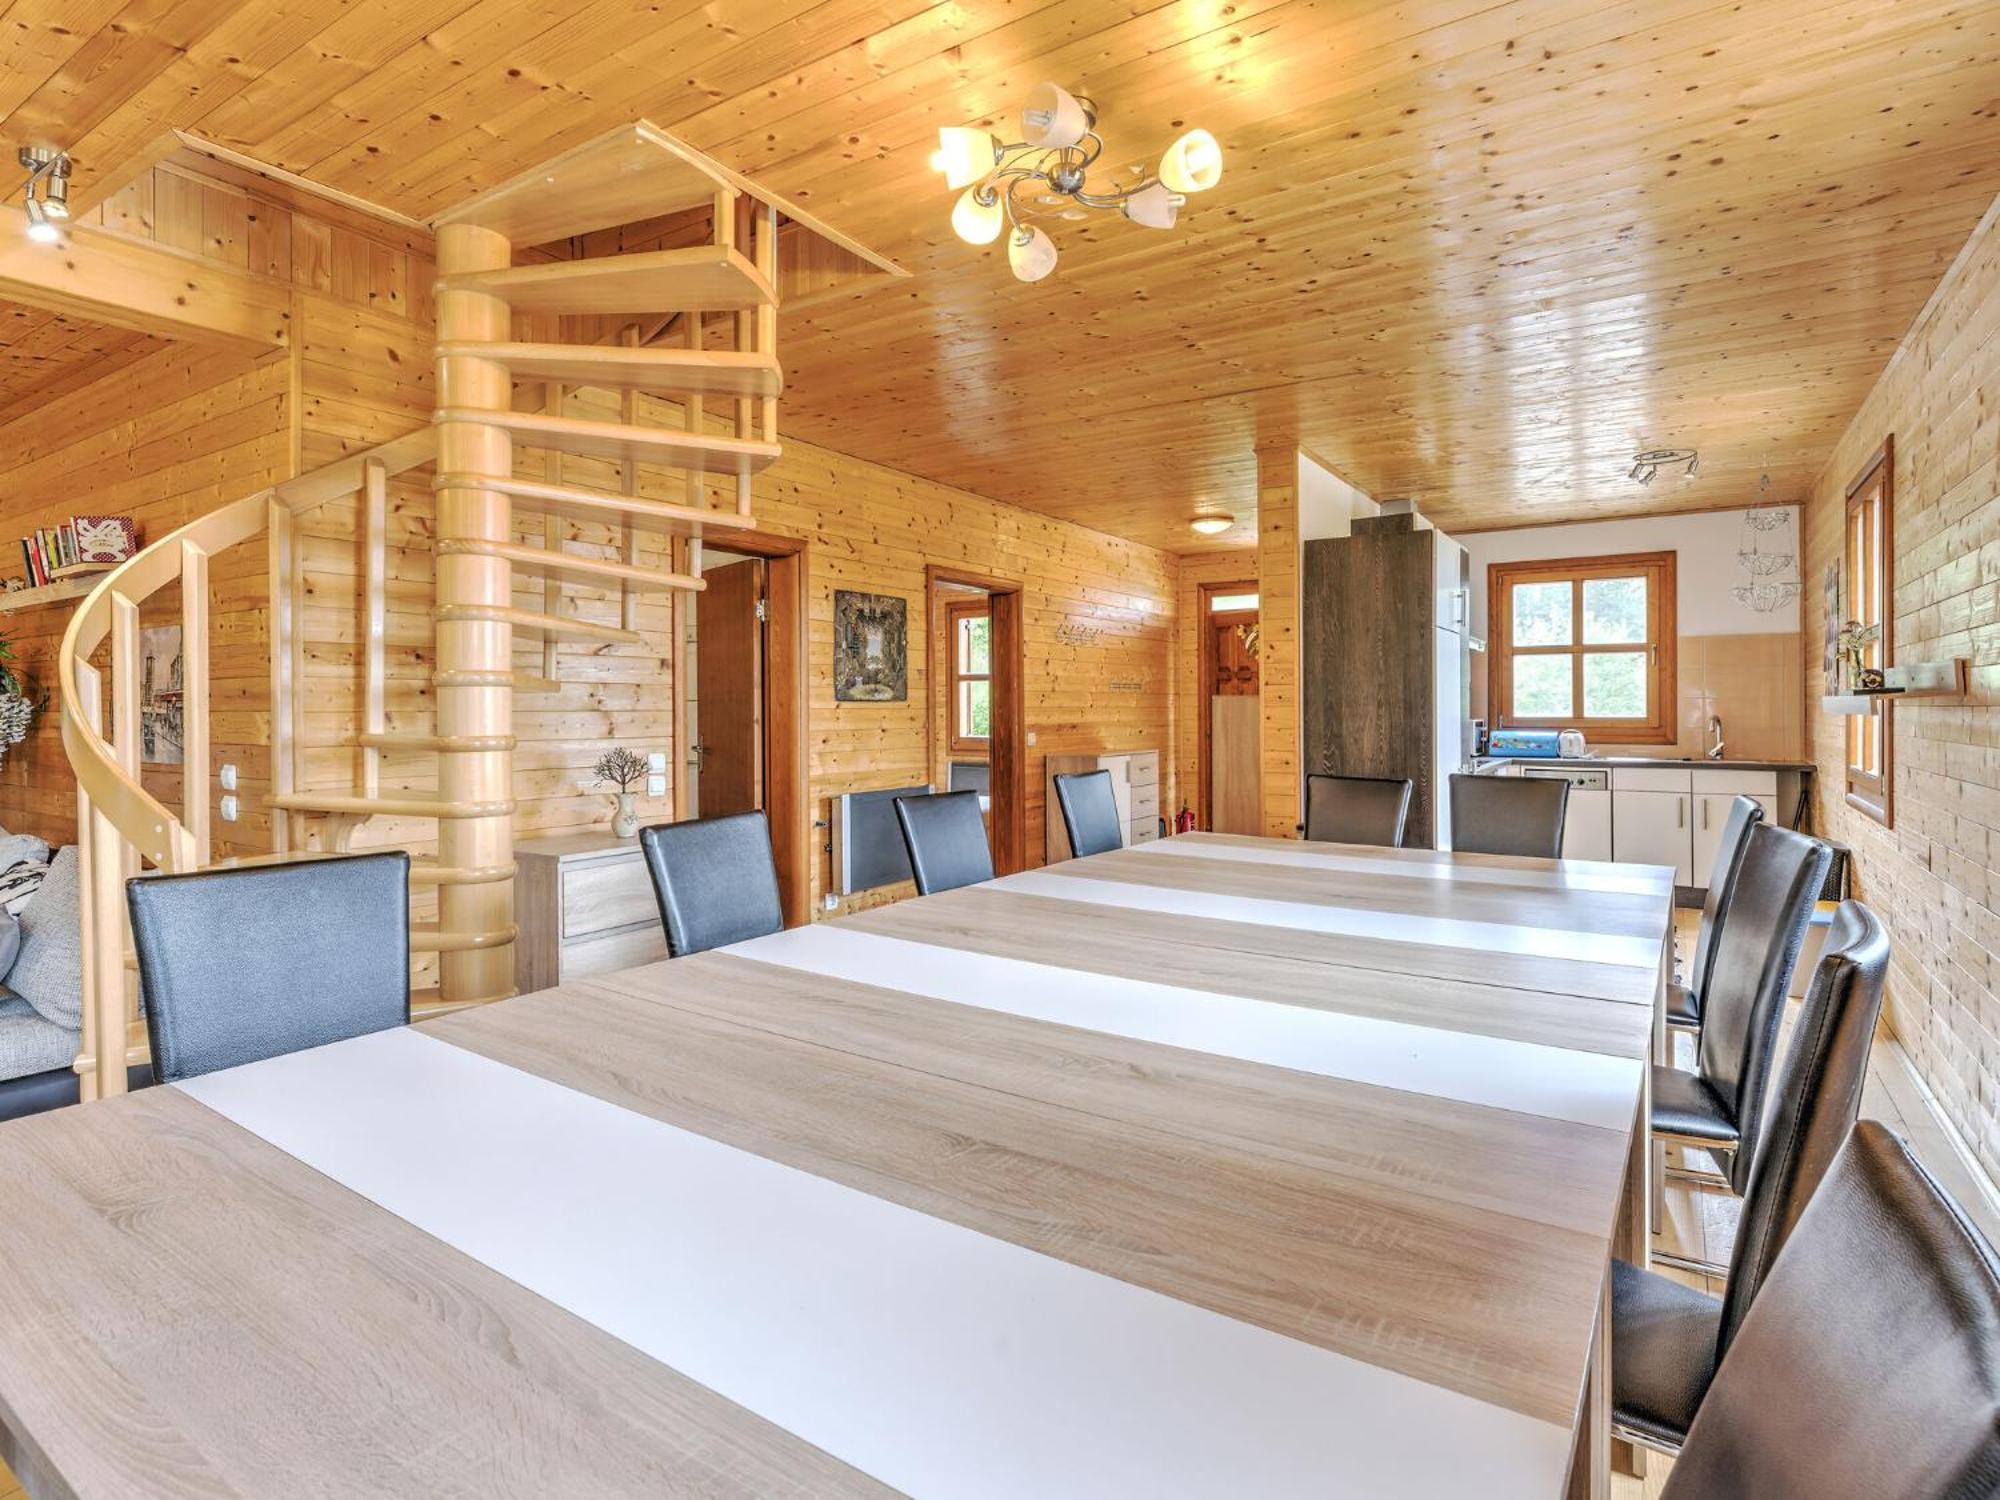 Detached Wooden Chalet In Liebenfels Carinthia Near The Simonh He Ski Area 外观 照片